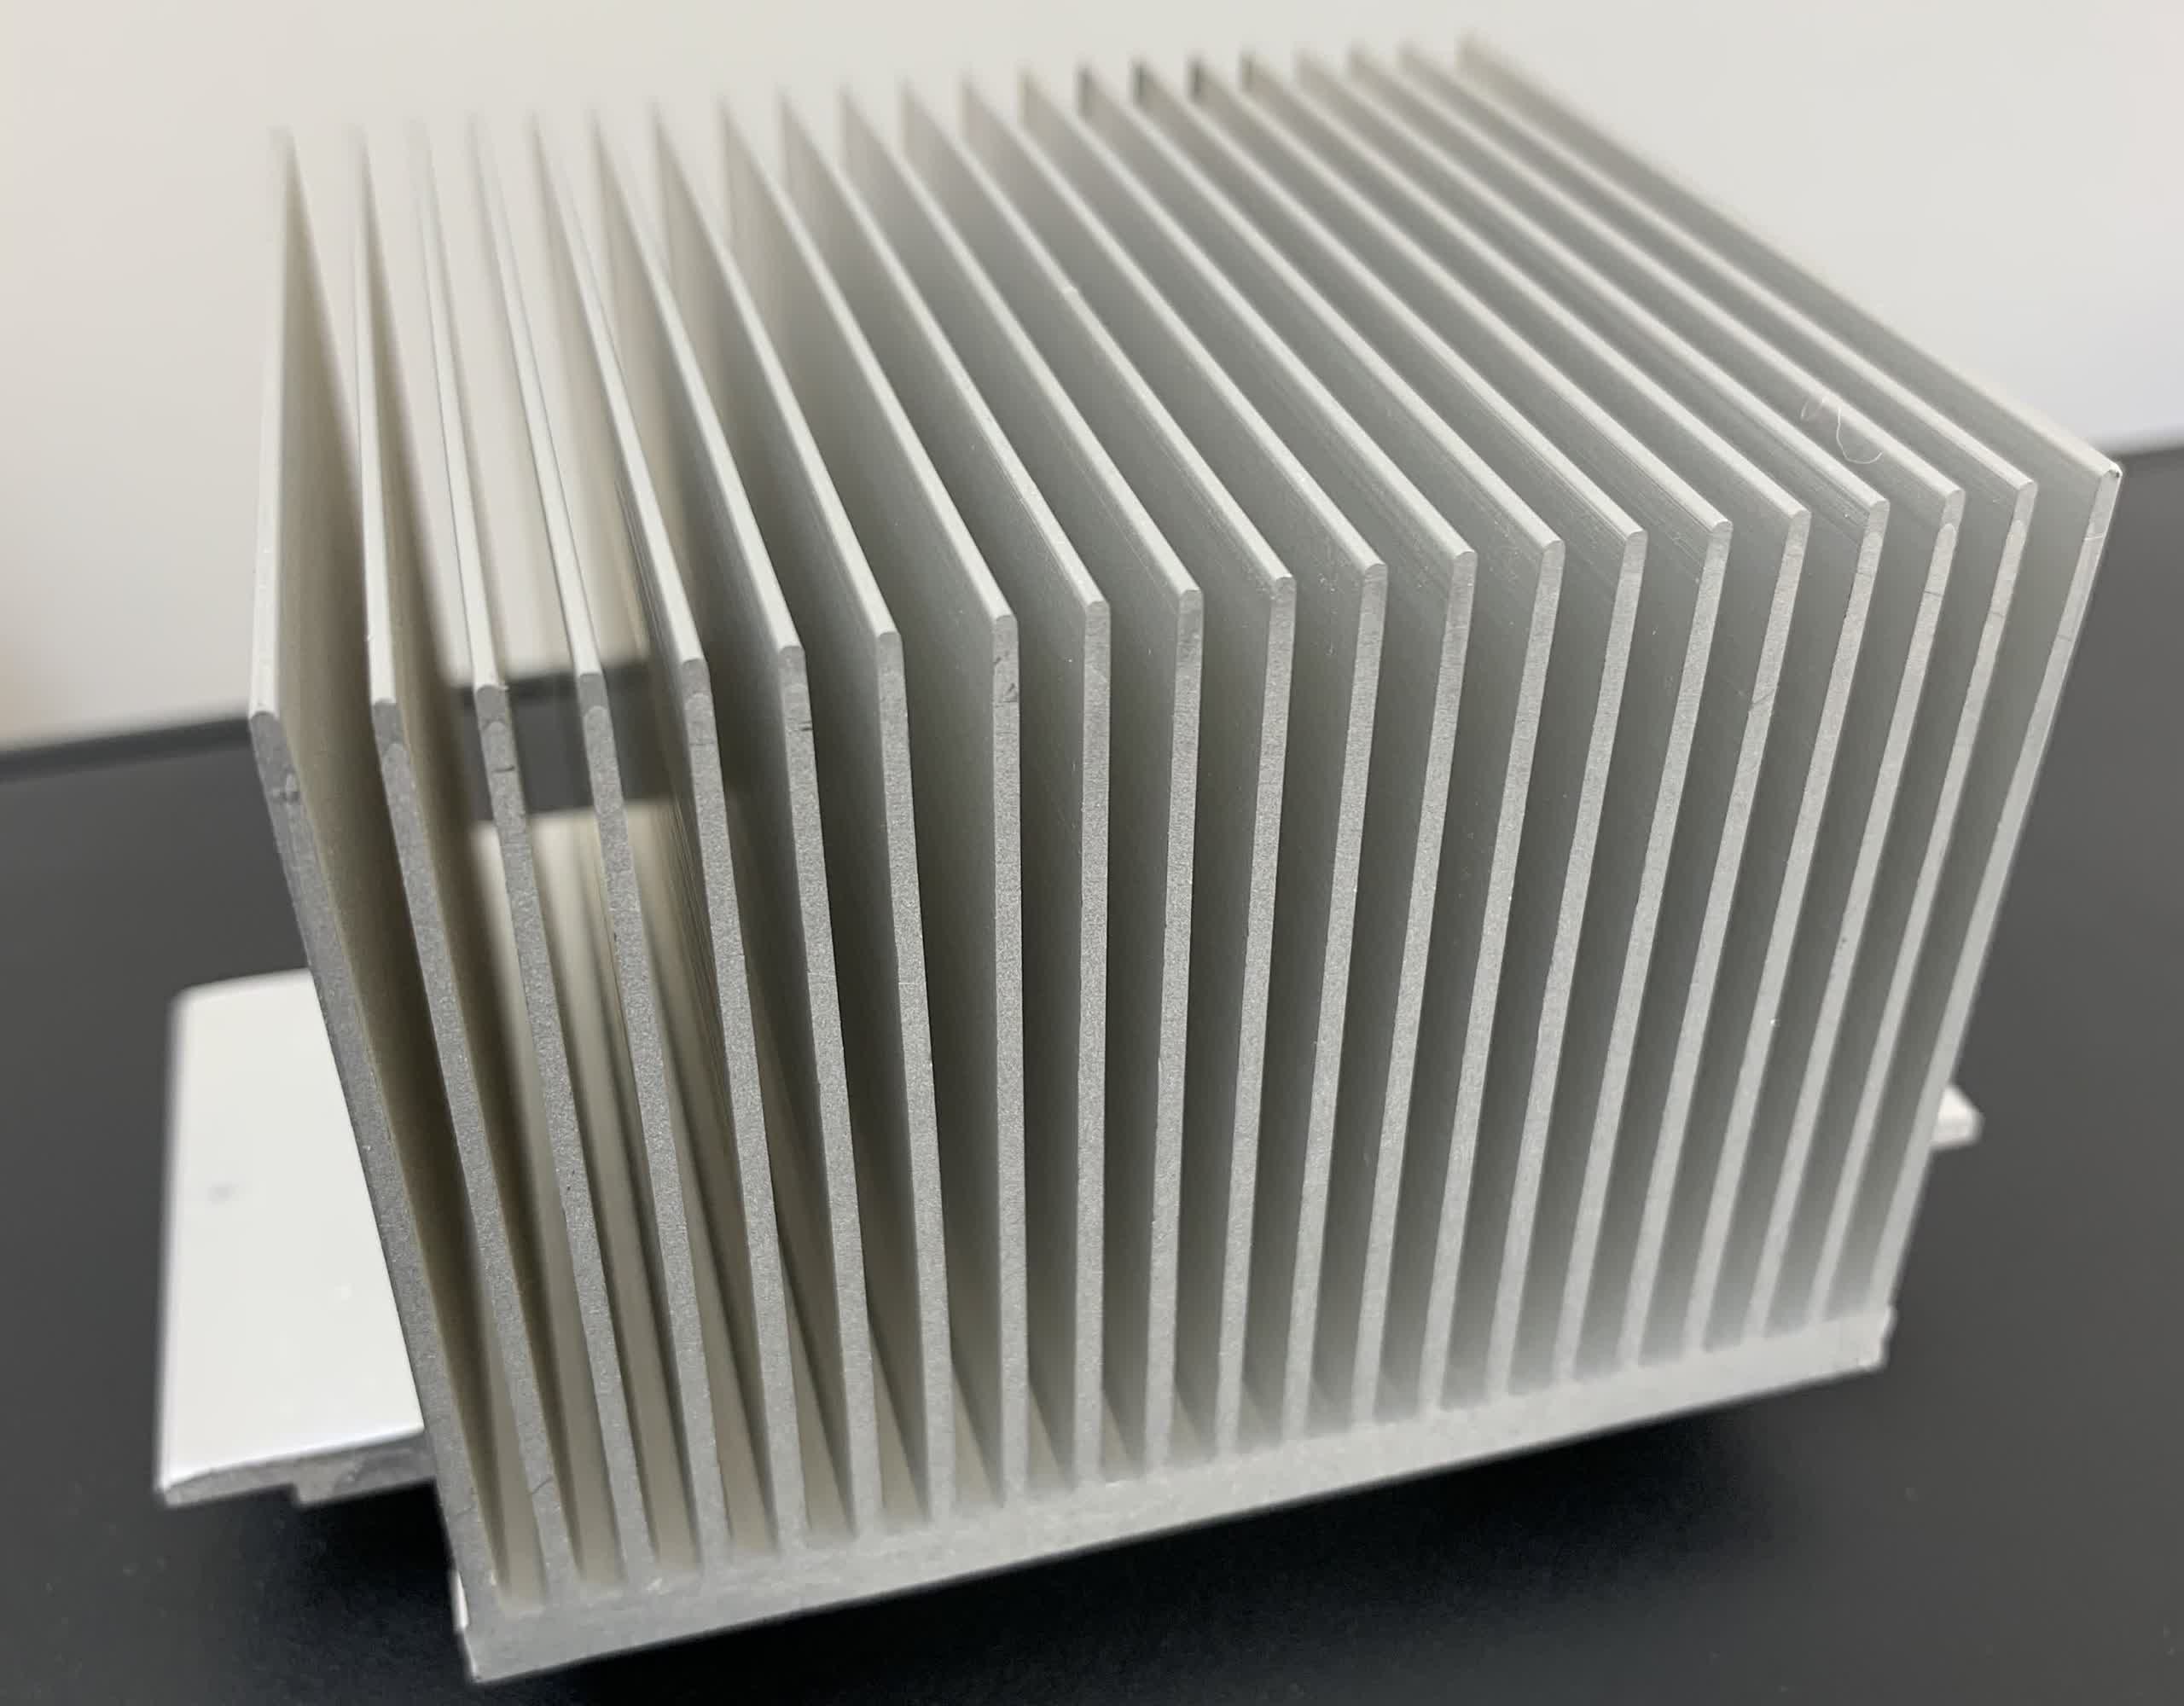 Not new, but cool: How heatsinks are made